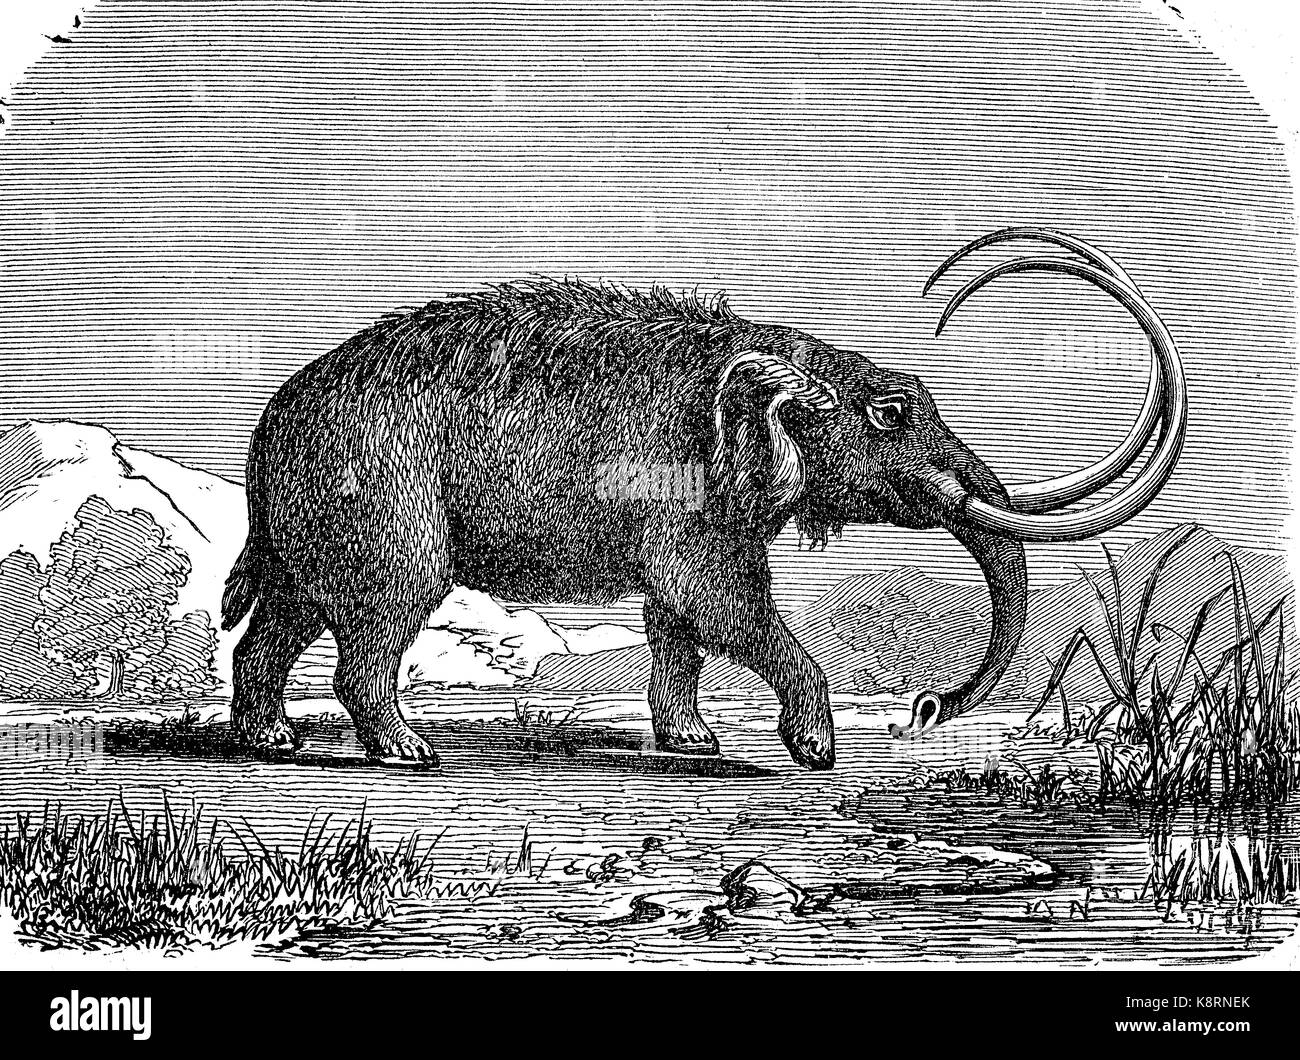 Mastodons are any species of extinct mammutid proboscideans in the genus Mammut, distantly related to elephants, digital improved reproduction of a woodcut, published in the 19th century Stock Photo